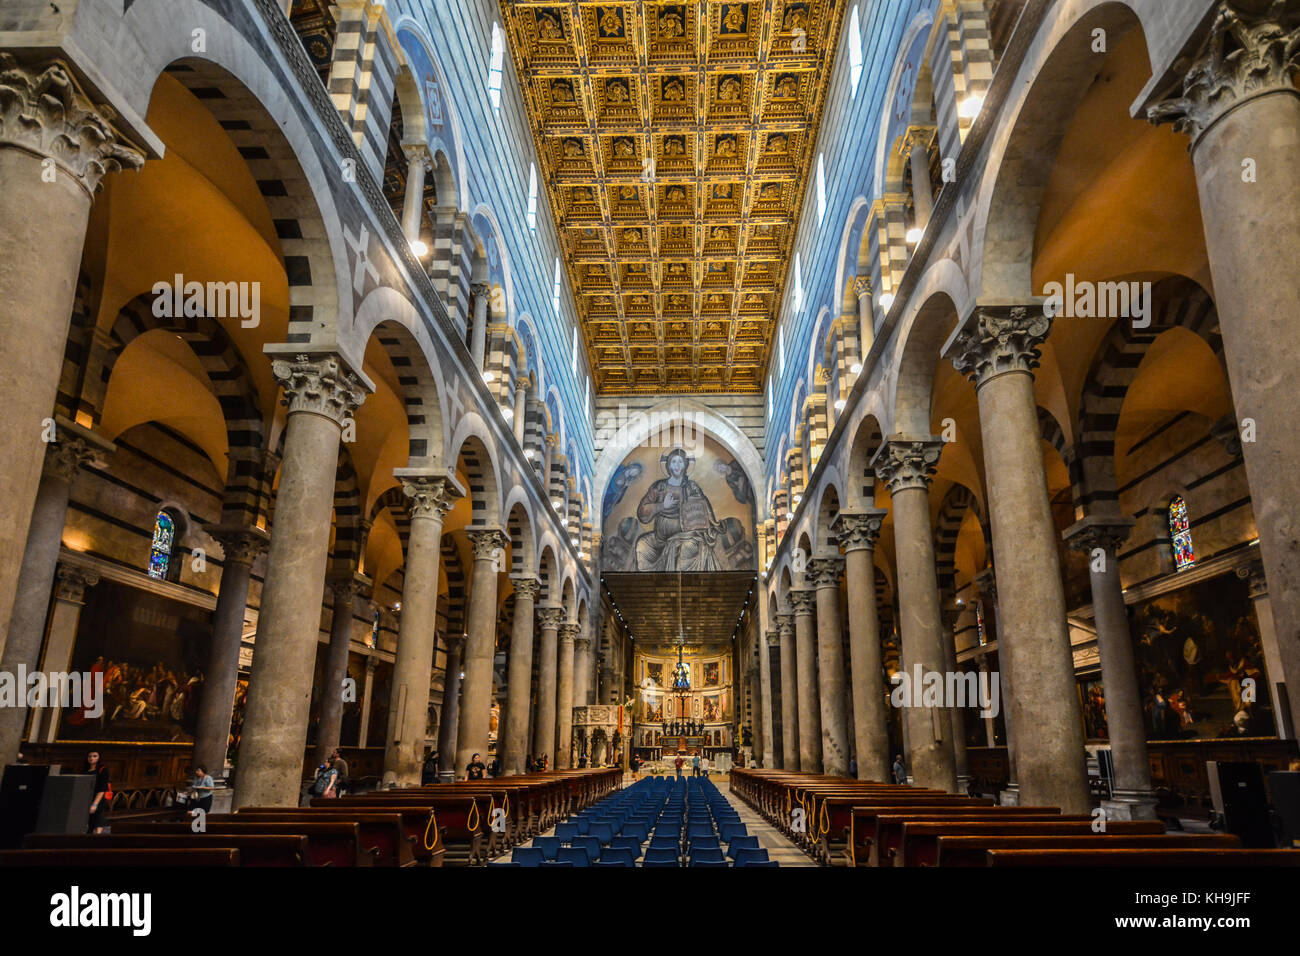 Interior of the Duomo cathedral on the Piazza dei Miracoli in the Tuscan city of Pisa, Italy Stock Photo